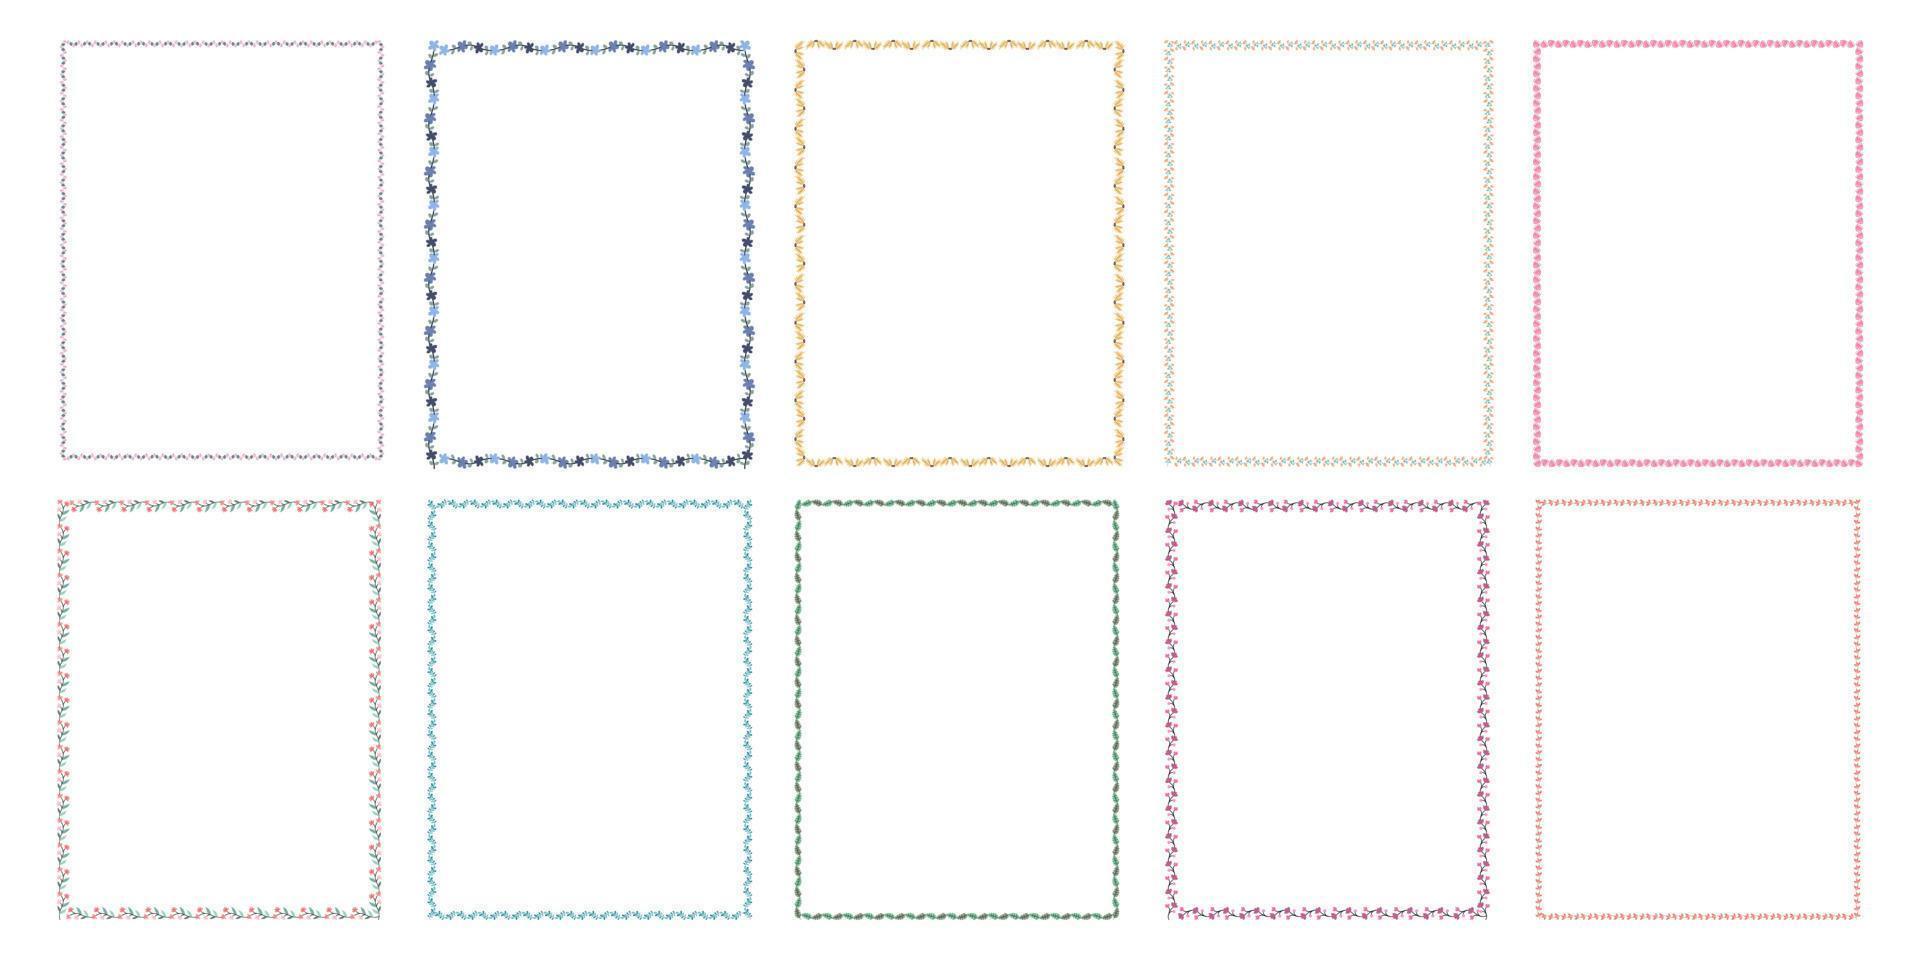 Cute flower pattern border Designed in doodle style for cards, worksheets, paper patterns, digital prints, scrapbooks, covers and more. vector